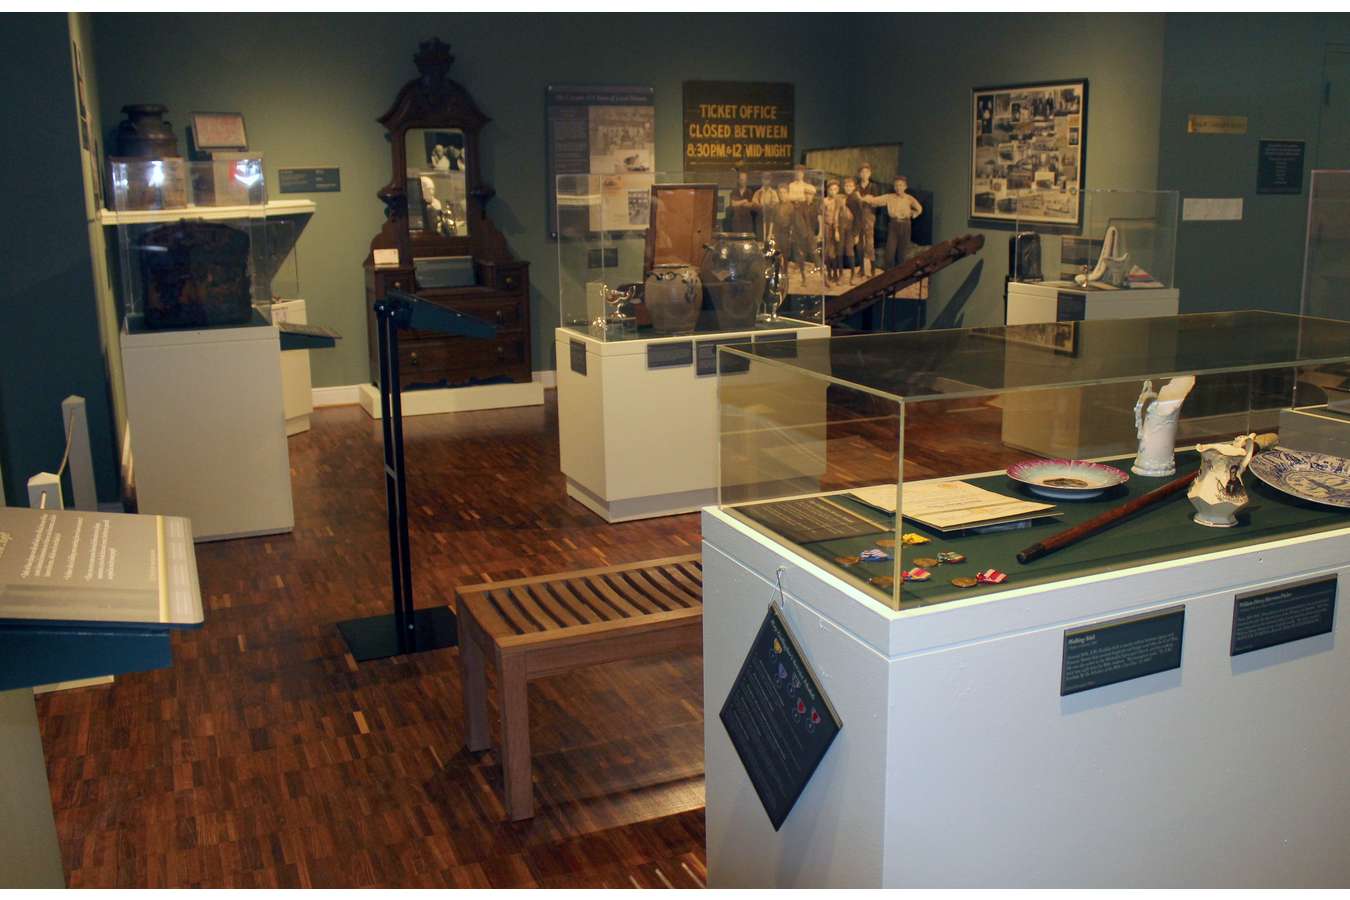 4 Lycem : Display Case layout with "Docent Card" interpreting case artifacts